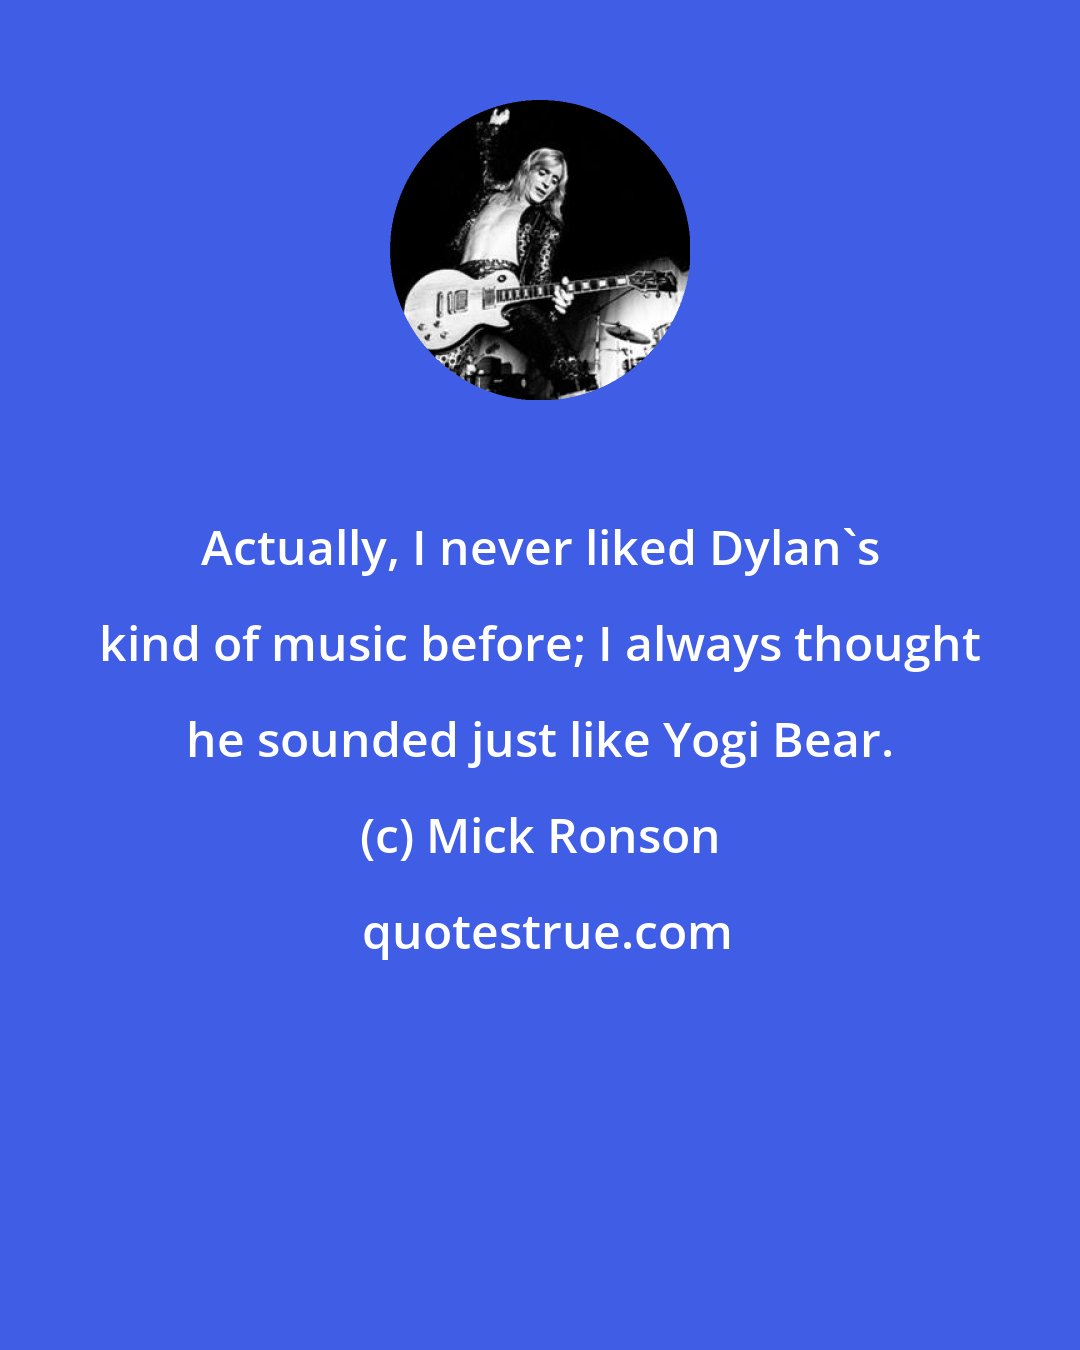 Mick Ronson: Actually, I never liked Dylan's kind of music before; I always thought he sounded just like Yogi Bear.